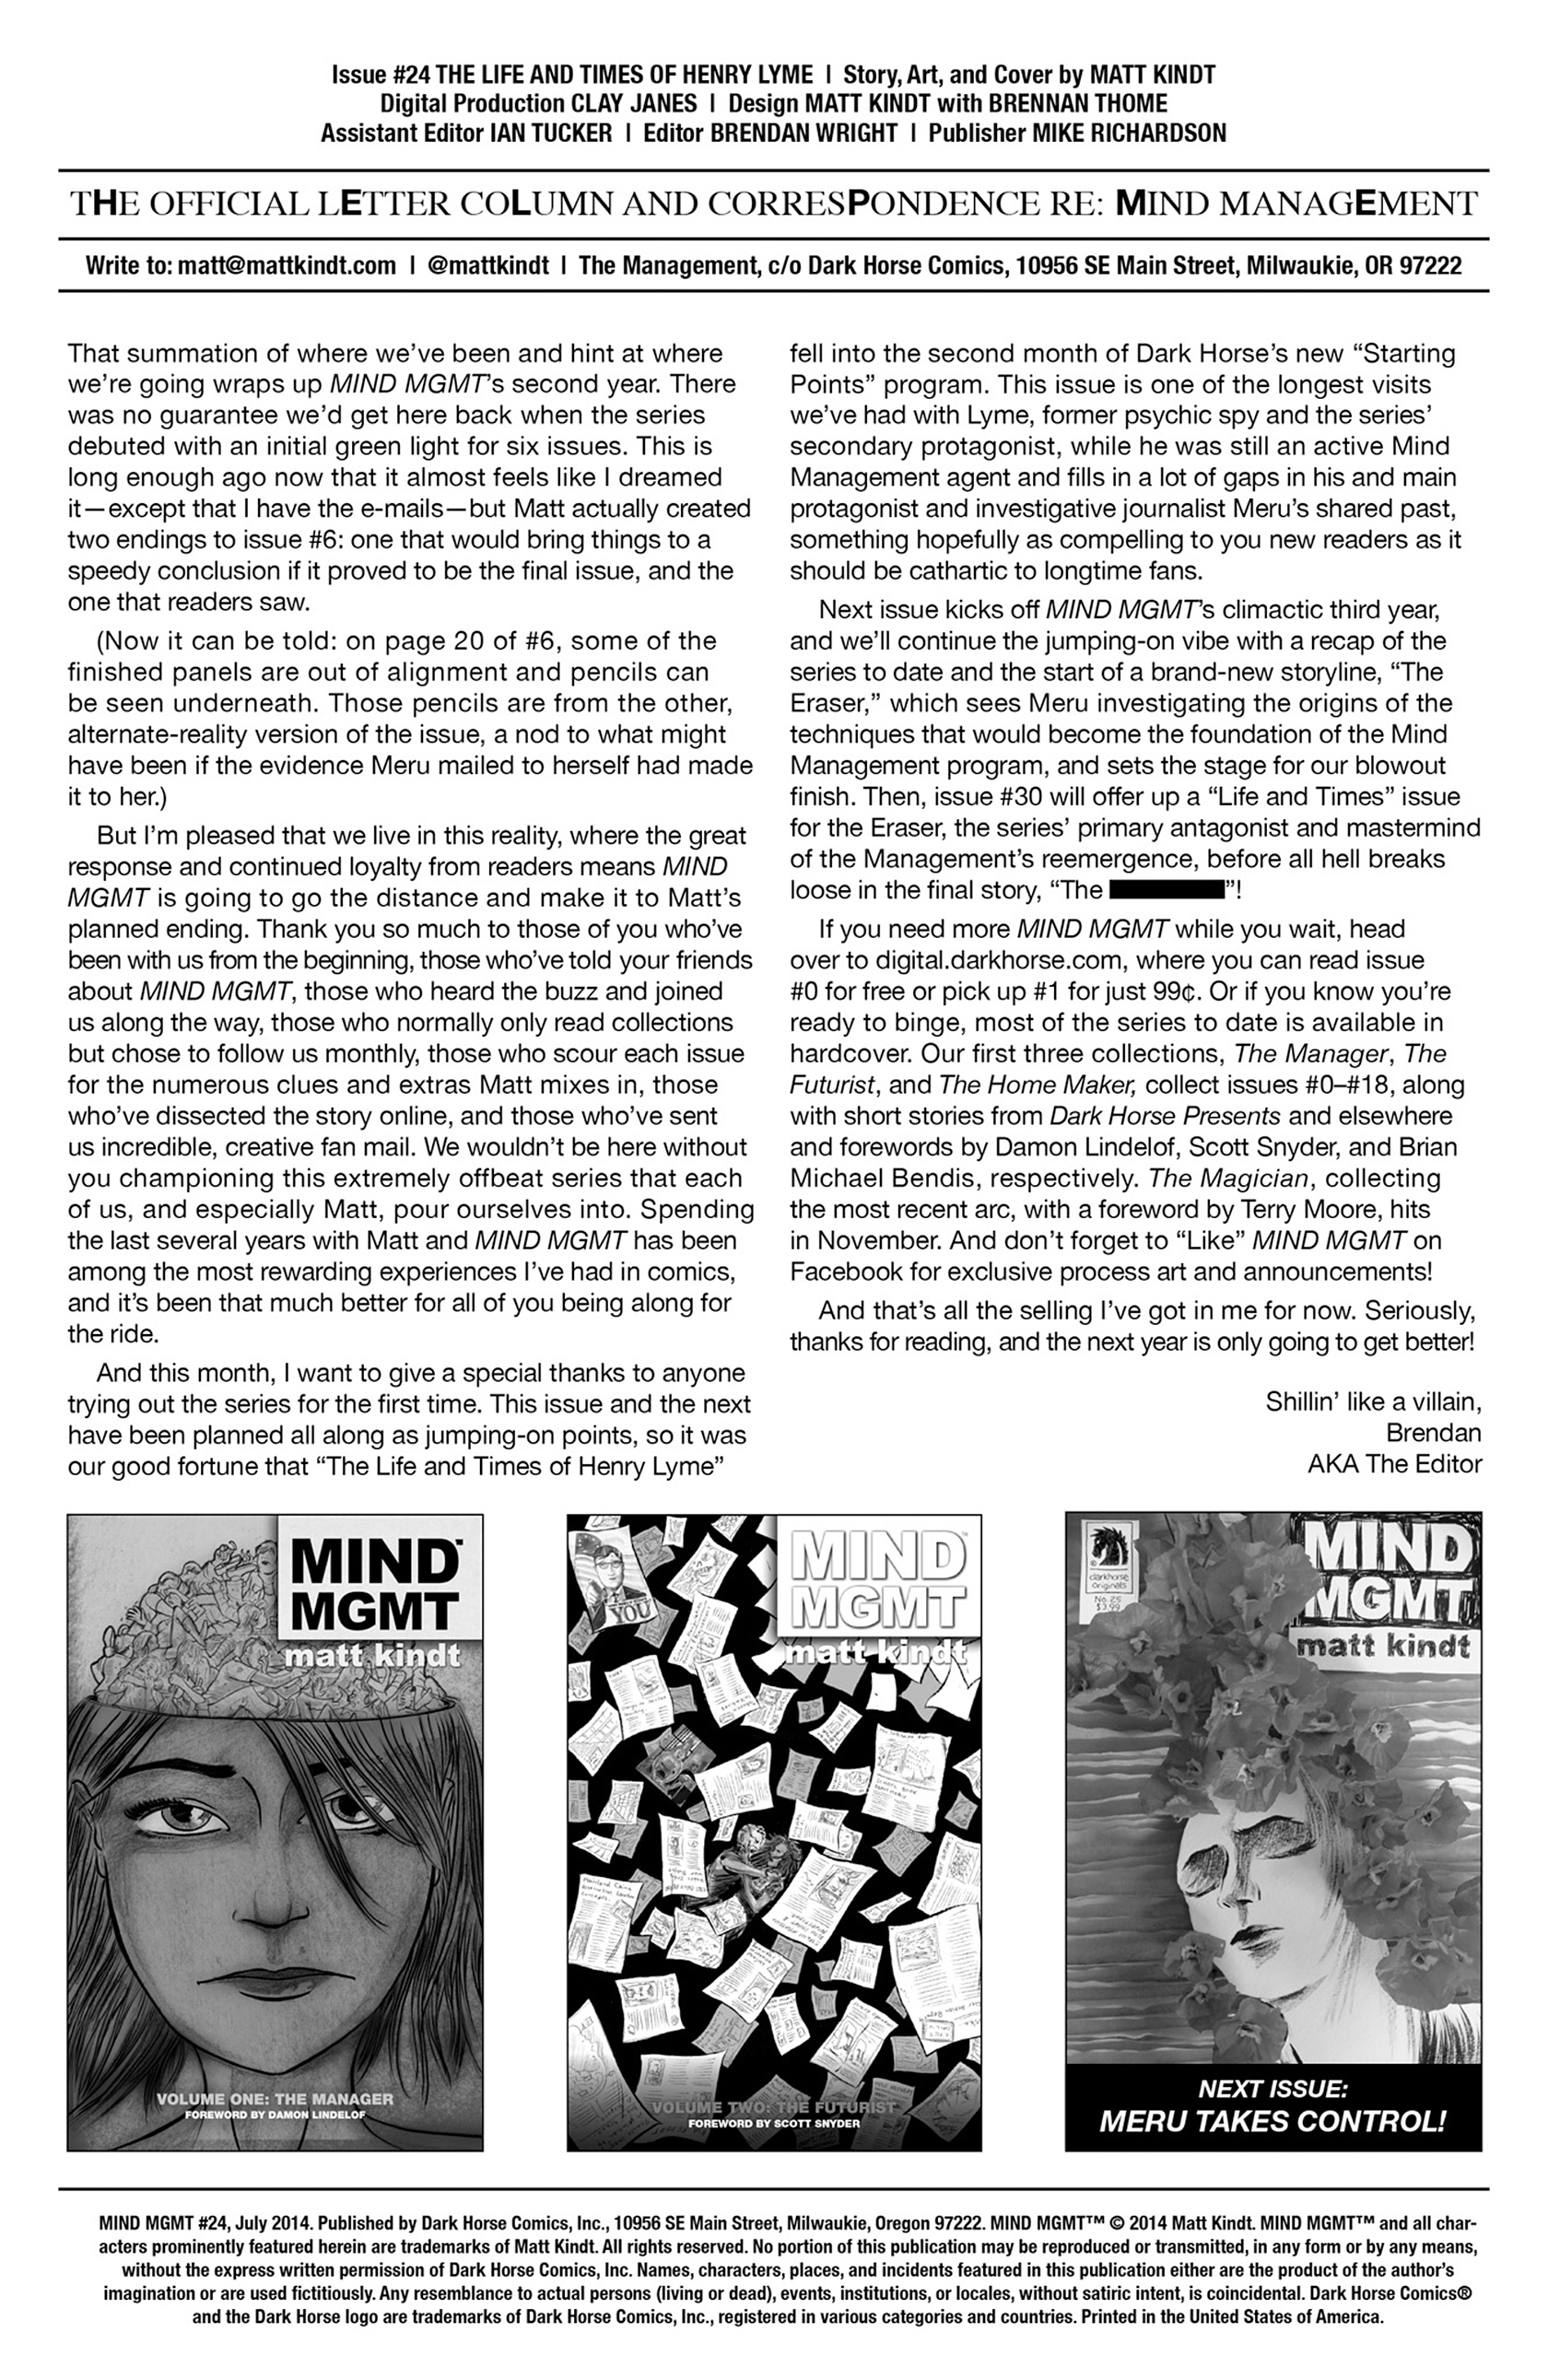 Read online MIND MGMT comic -  Issue #24 - 27